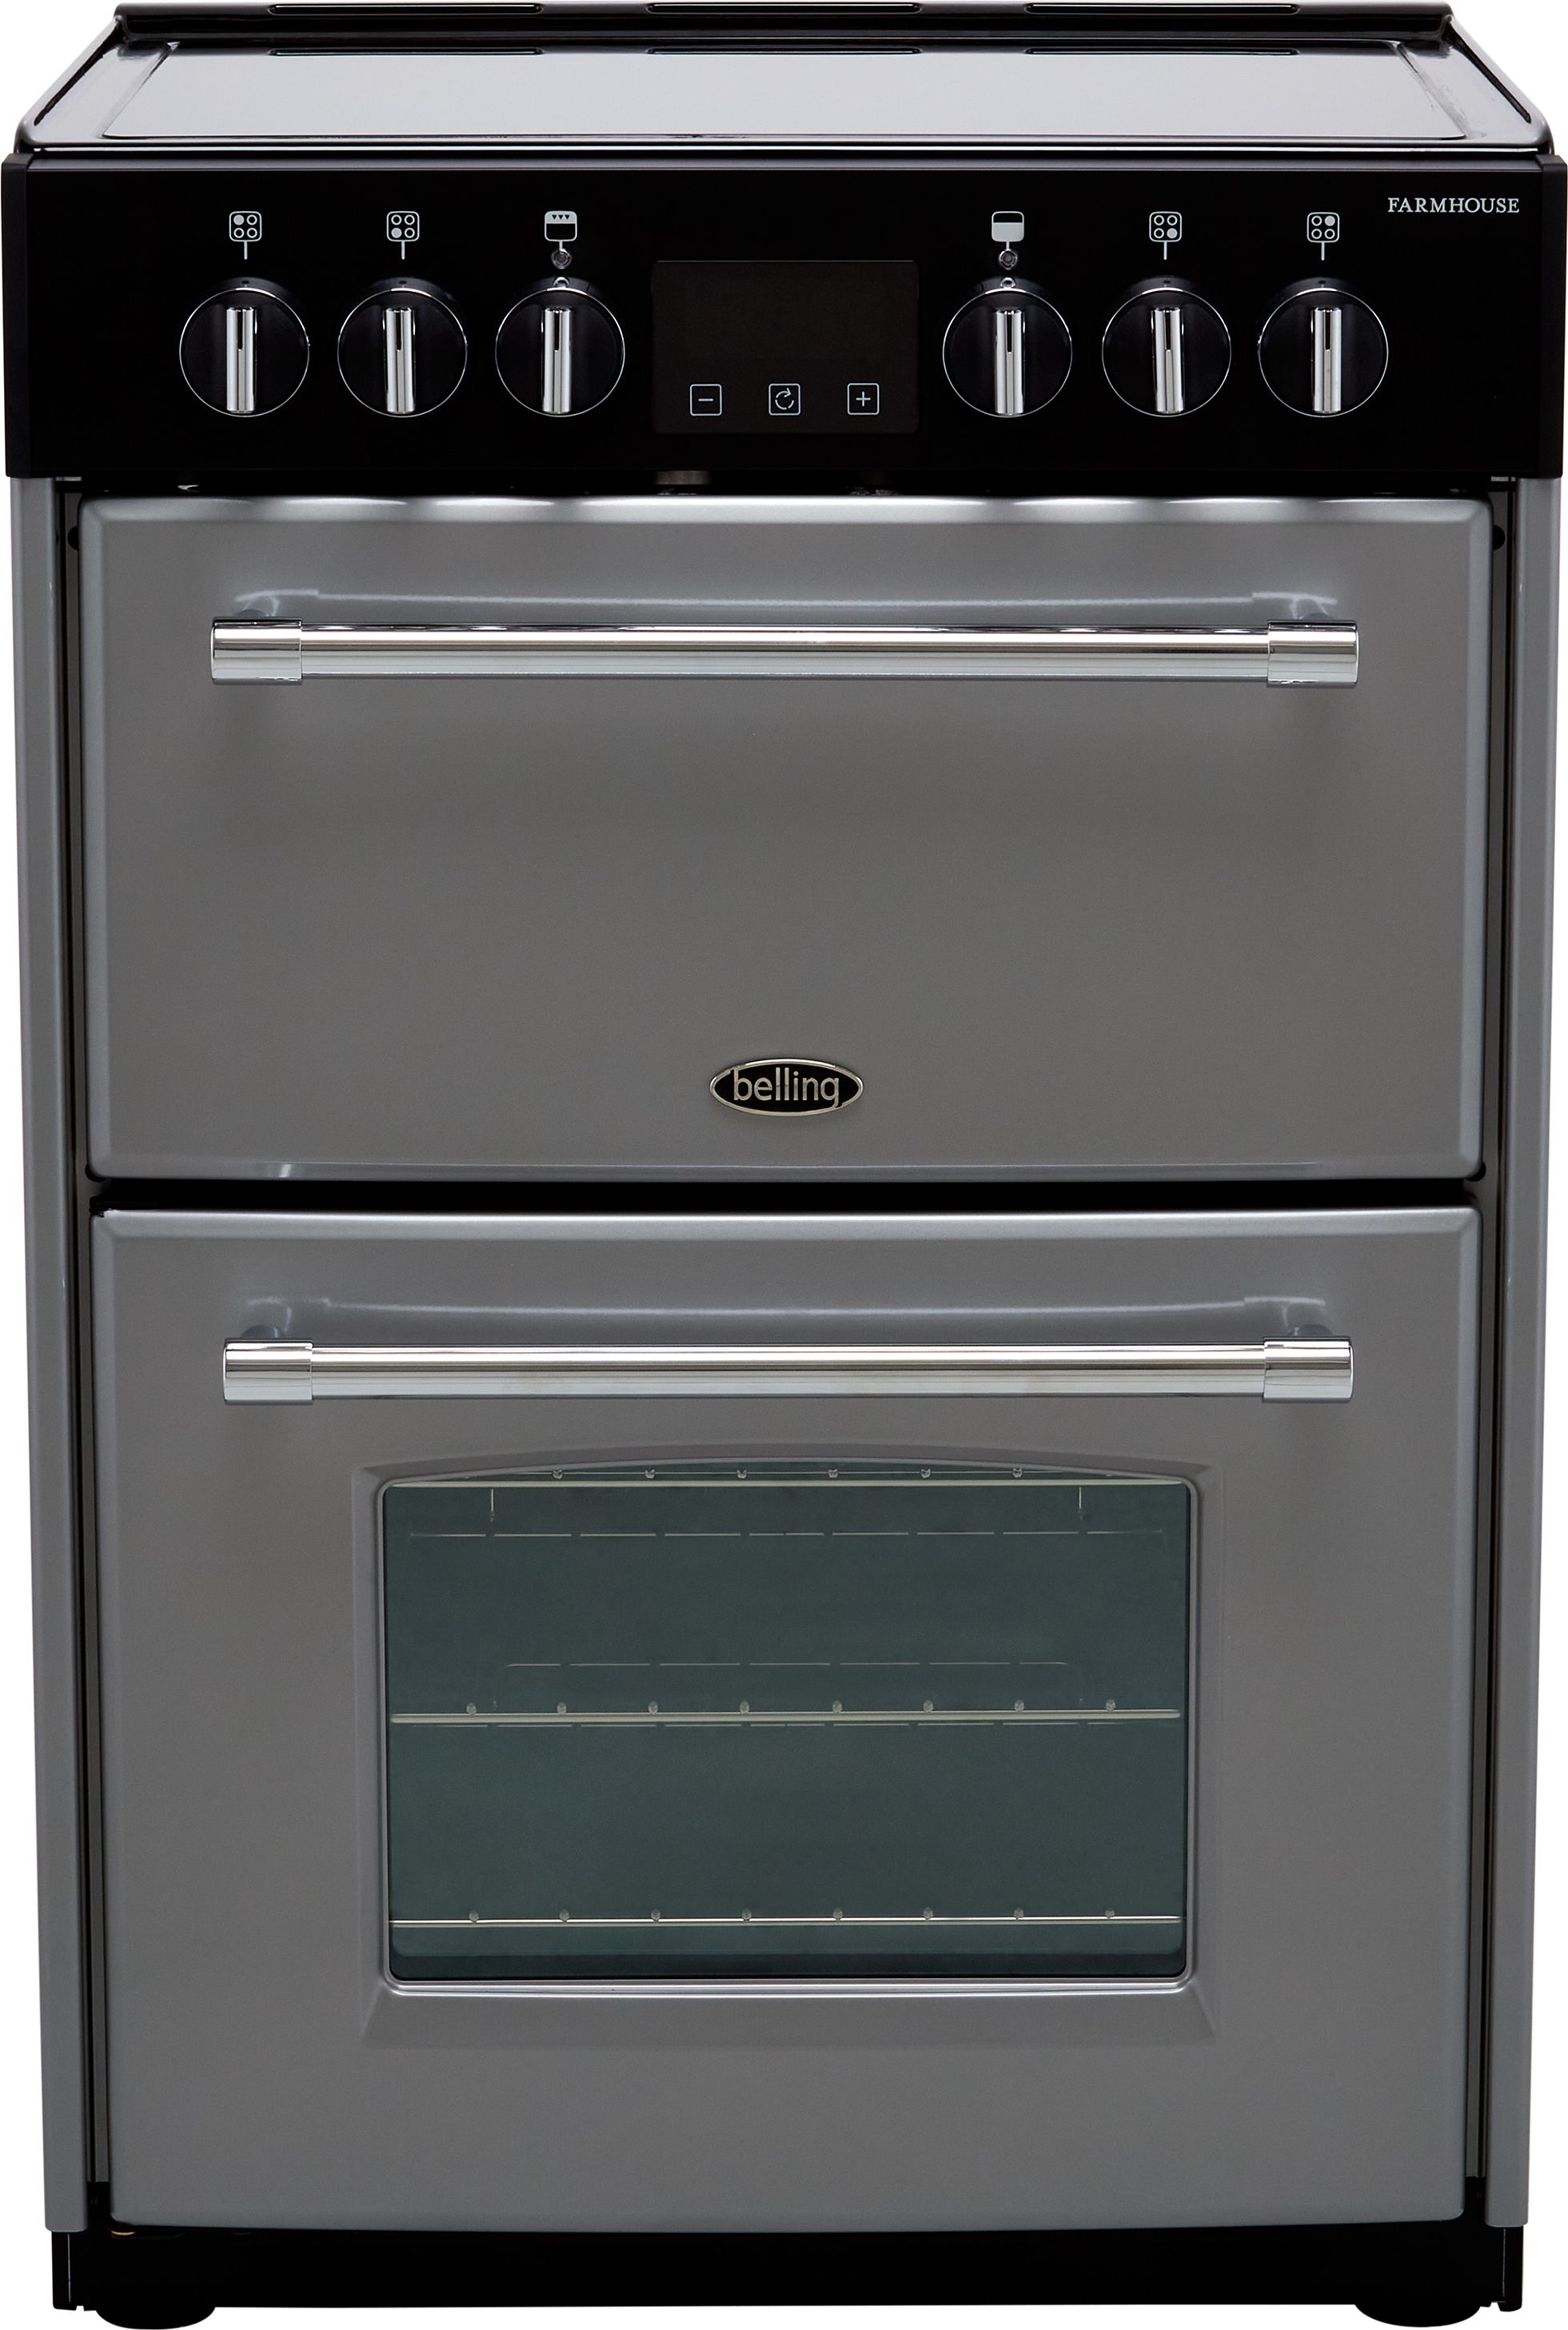 Belling Farmhouse60E 60cm Electric Cooker with Ceramic Hob - Silver - A/A Rated, Silver